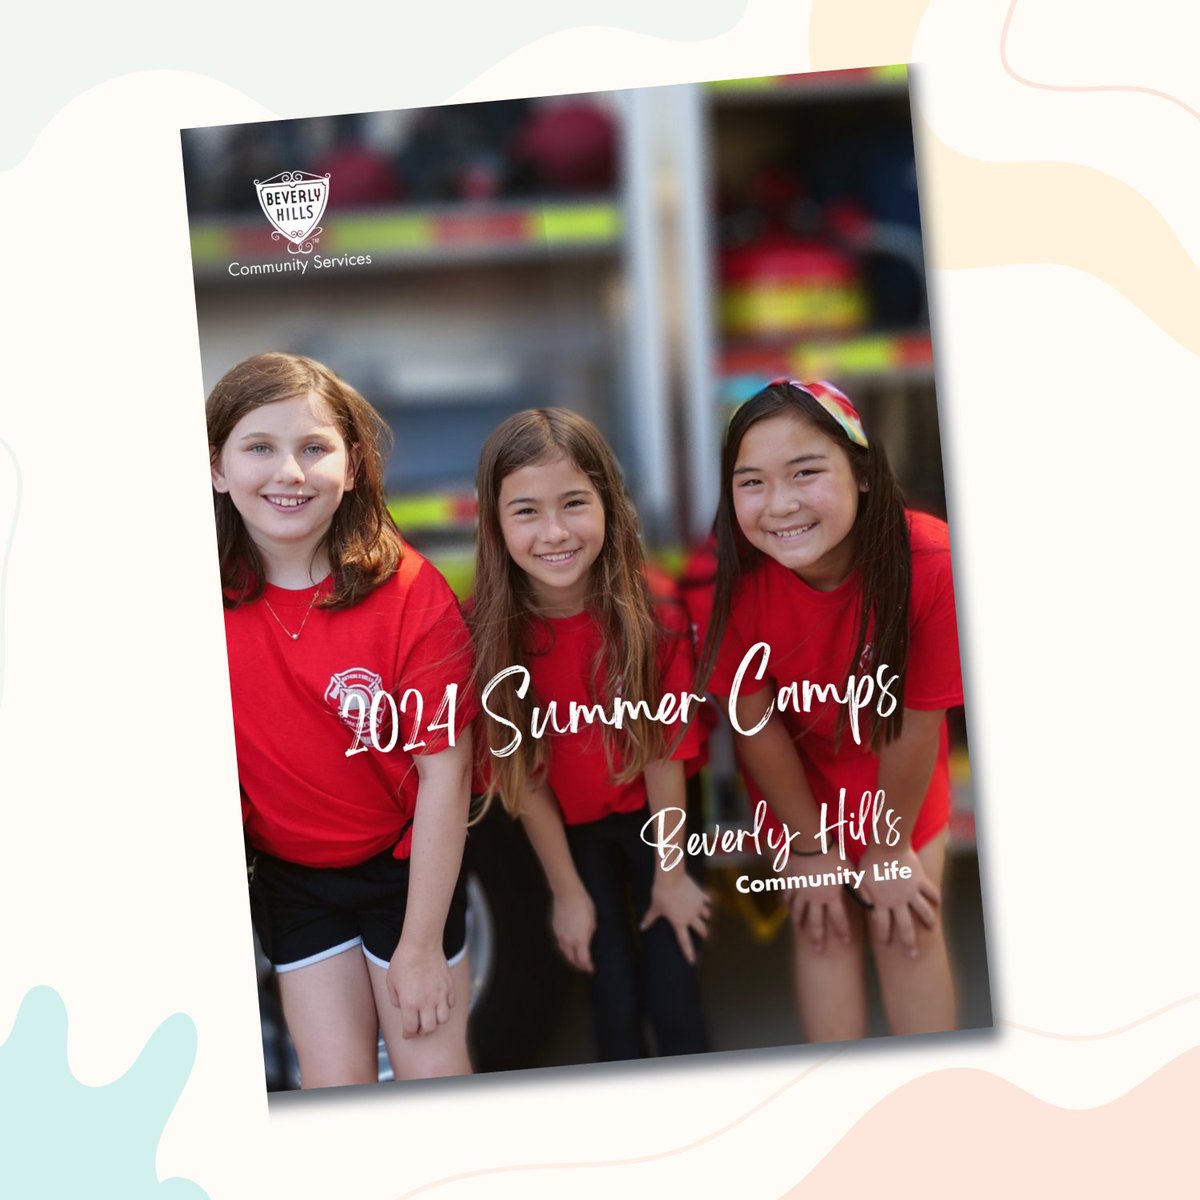 Summer Camp registration is NOW OPEN for Beverly Hills residents! 🎉😁 Check out our 2024 Summer Camp Brochure at beverlyhills.org/summercampbroc… and register at beverlyhills.org/bhrec. Non-resident registration will open April 17. #communitylifebh #communitylifebh #parksandrec